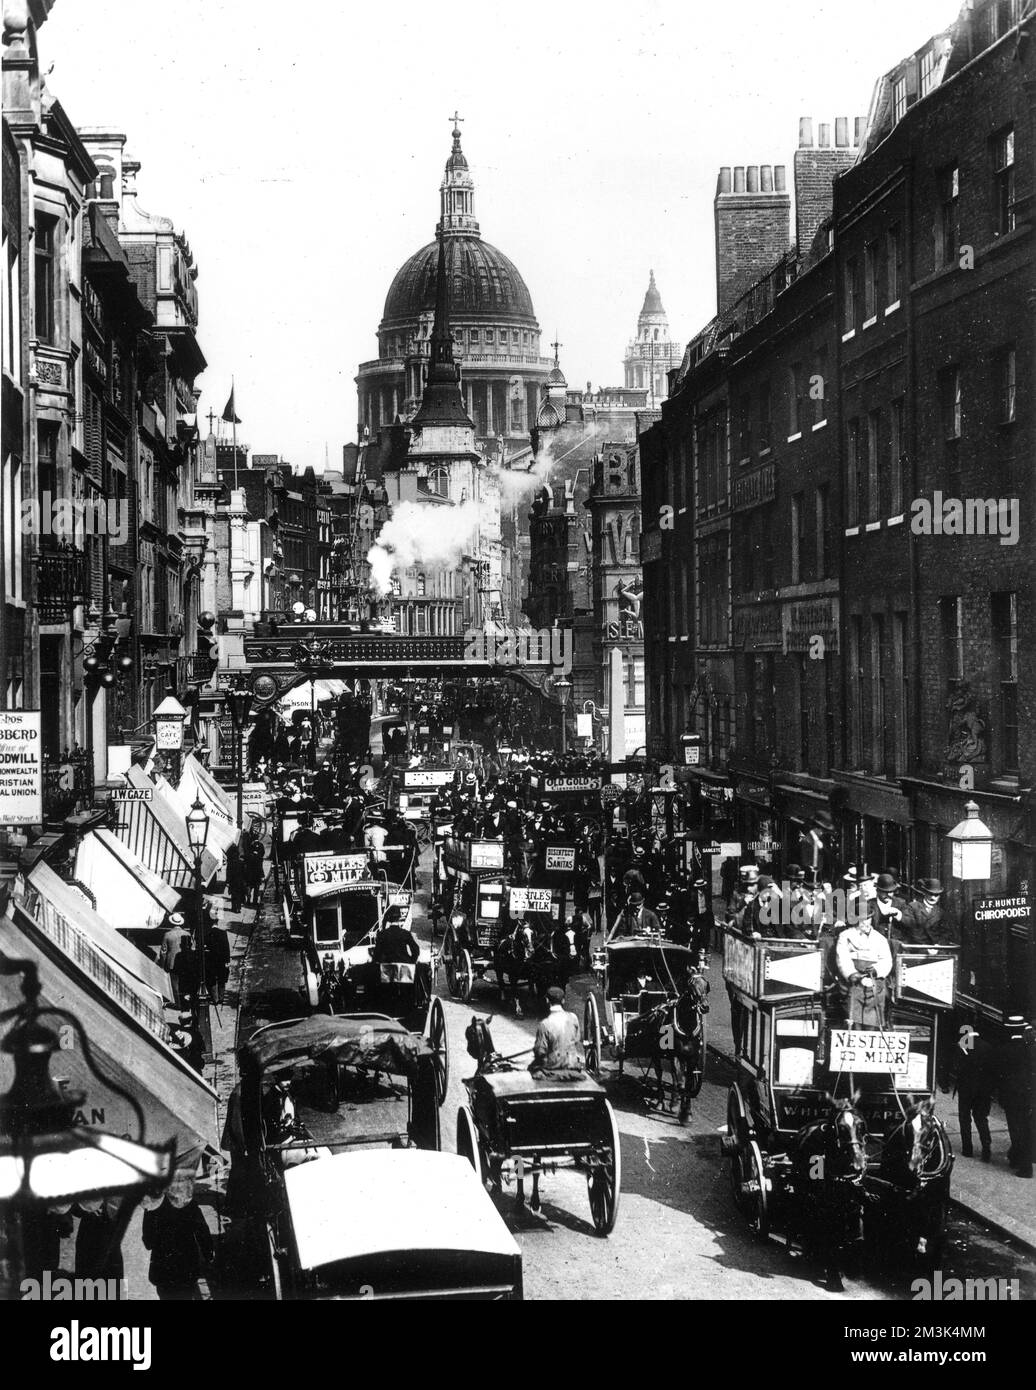 Photograph showing the view east along Fleet Street, towards Ludgate and St. Paul's Cathedral, c.1894.   A large number of horse-drawn carriages can be seen rushing along the street as a steam train heads south towards Blackfriars.     Date: c.1894 Stock Photo